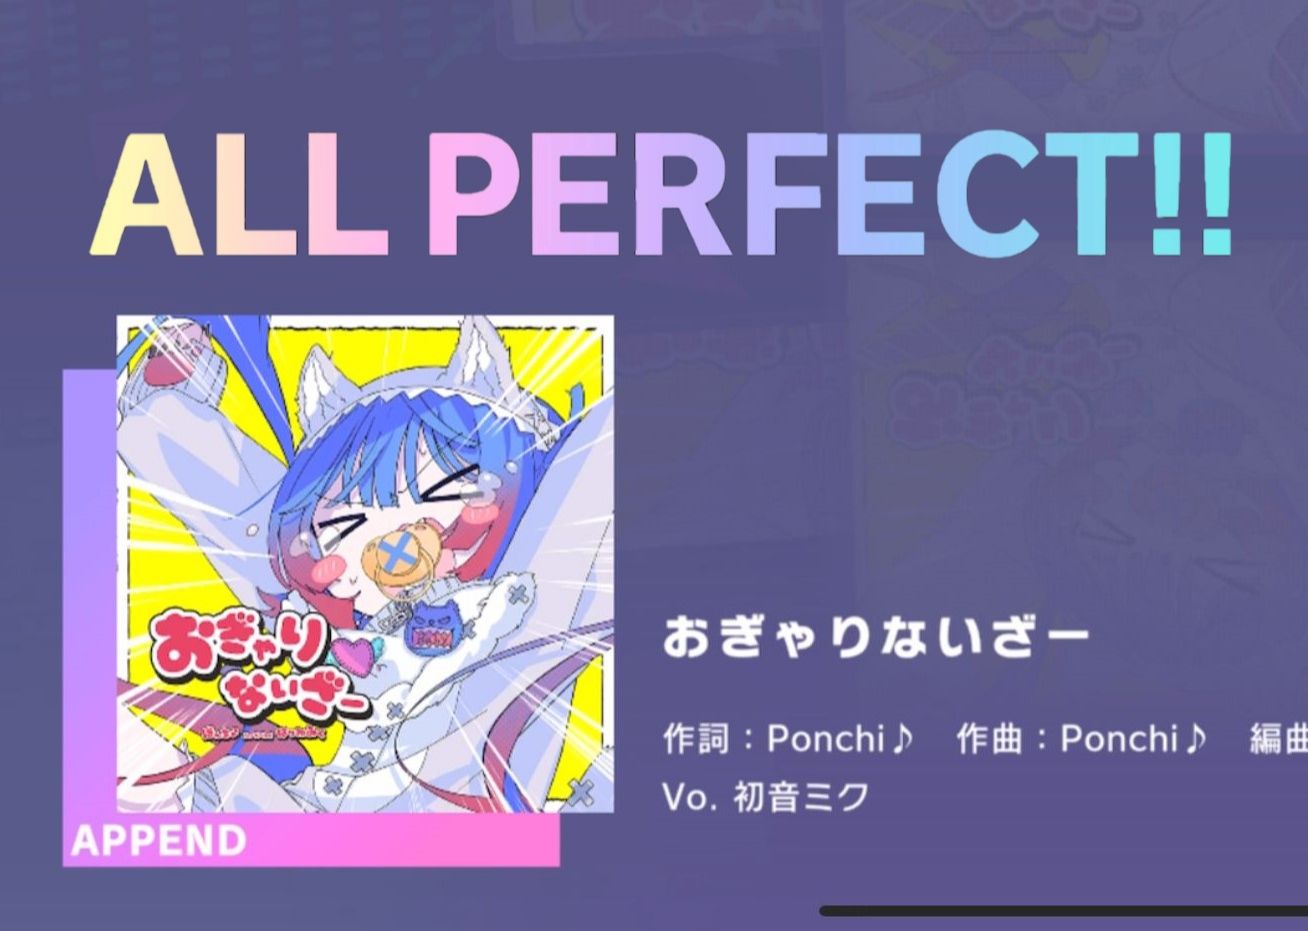 【Project sekai/全国首杀】おぎゃりないざ一 [APPEND37] All Perfect 无判